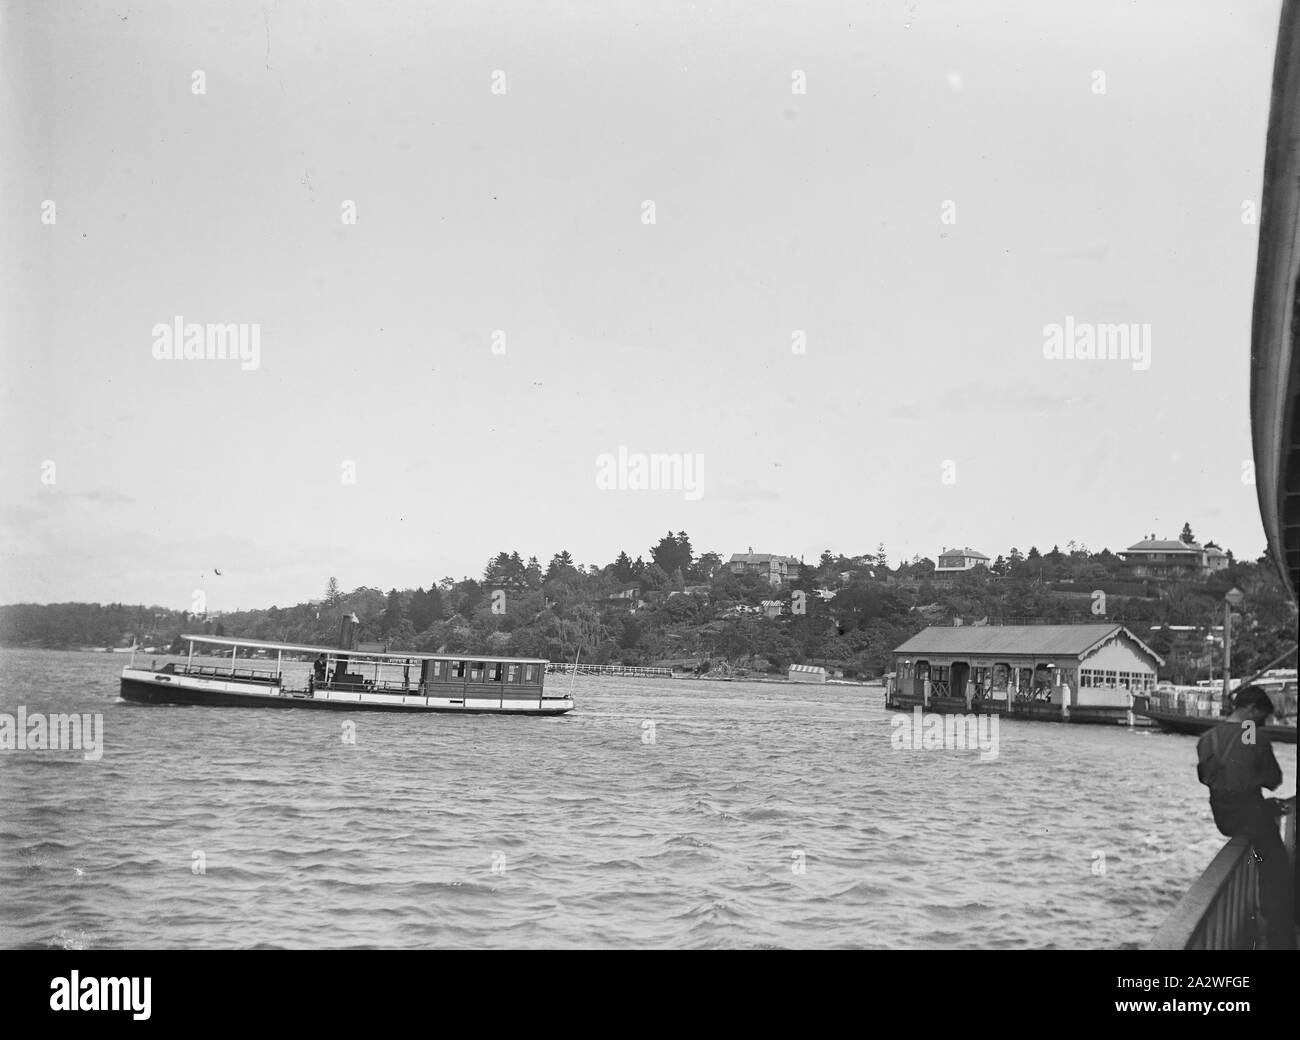 Glass Negative - Ferry in Sydney Harbour, circa 1900s, Black and white 1/4 plate glass negative featuring a passenger ferry departing a ferry terminal in Sydney Harbour, circa 1900s. This is one of twelve negatives originally housed in an Imperial Special Rapid Plates box featuring scenes in Sydney and a picnic at an unknown location, presumably in New South Wales or Victoria. The provenance of these images is unclear, but they were housed in Stock Photo